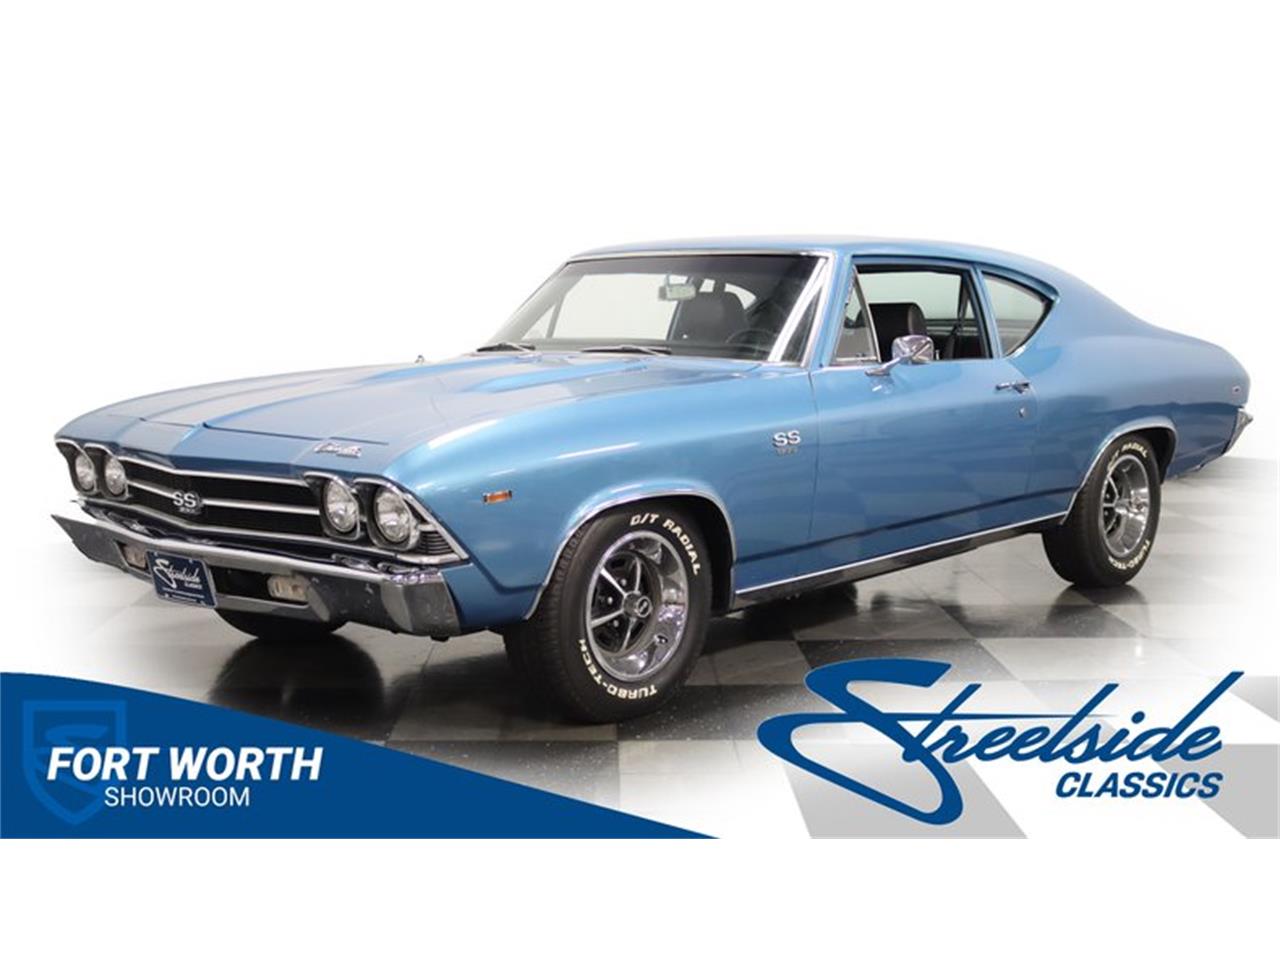 For Sale: 1969 Chevrolet Chevelle in Ft Worth, Texas for sale in Fort Worth, TX